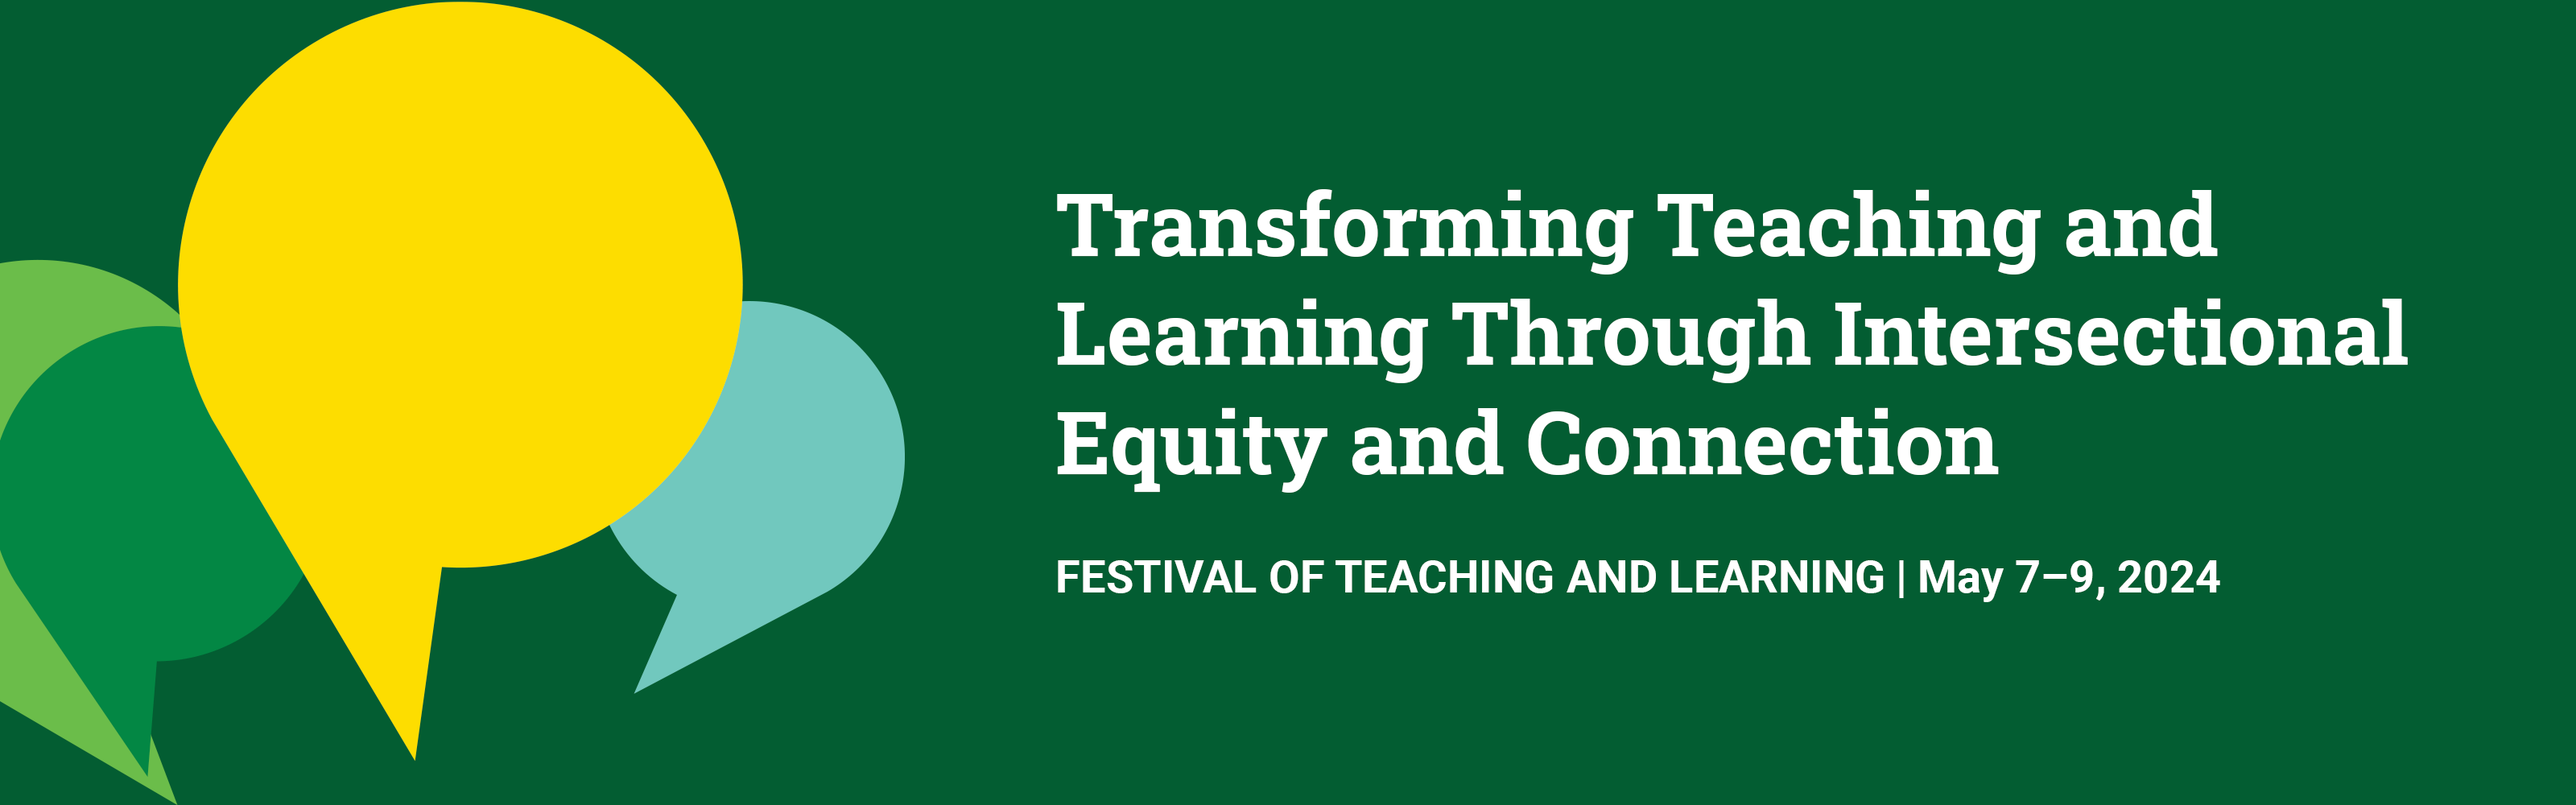 Transforming Teaching and Learning Through Intersectional Equity and Connection